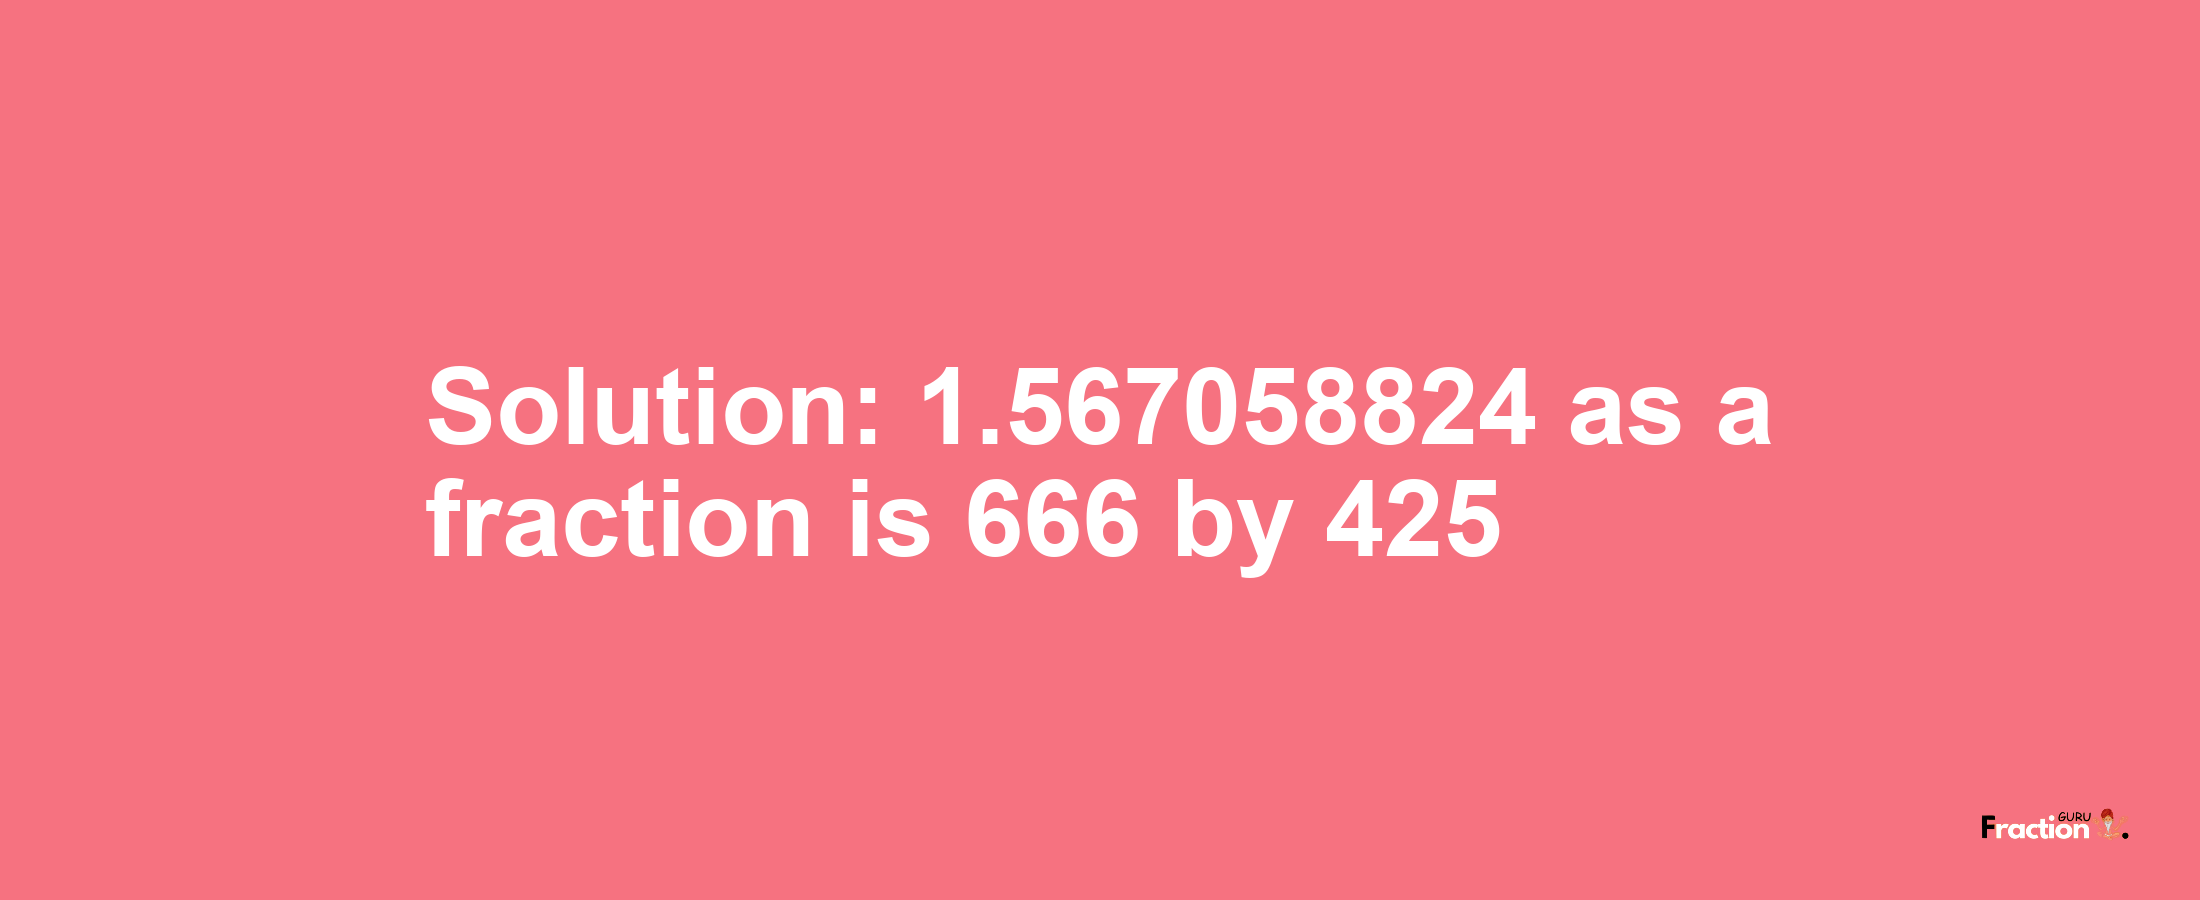 Solution:1.567058824 as a fraction is 666/425